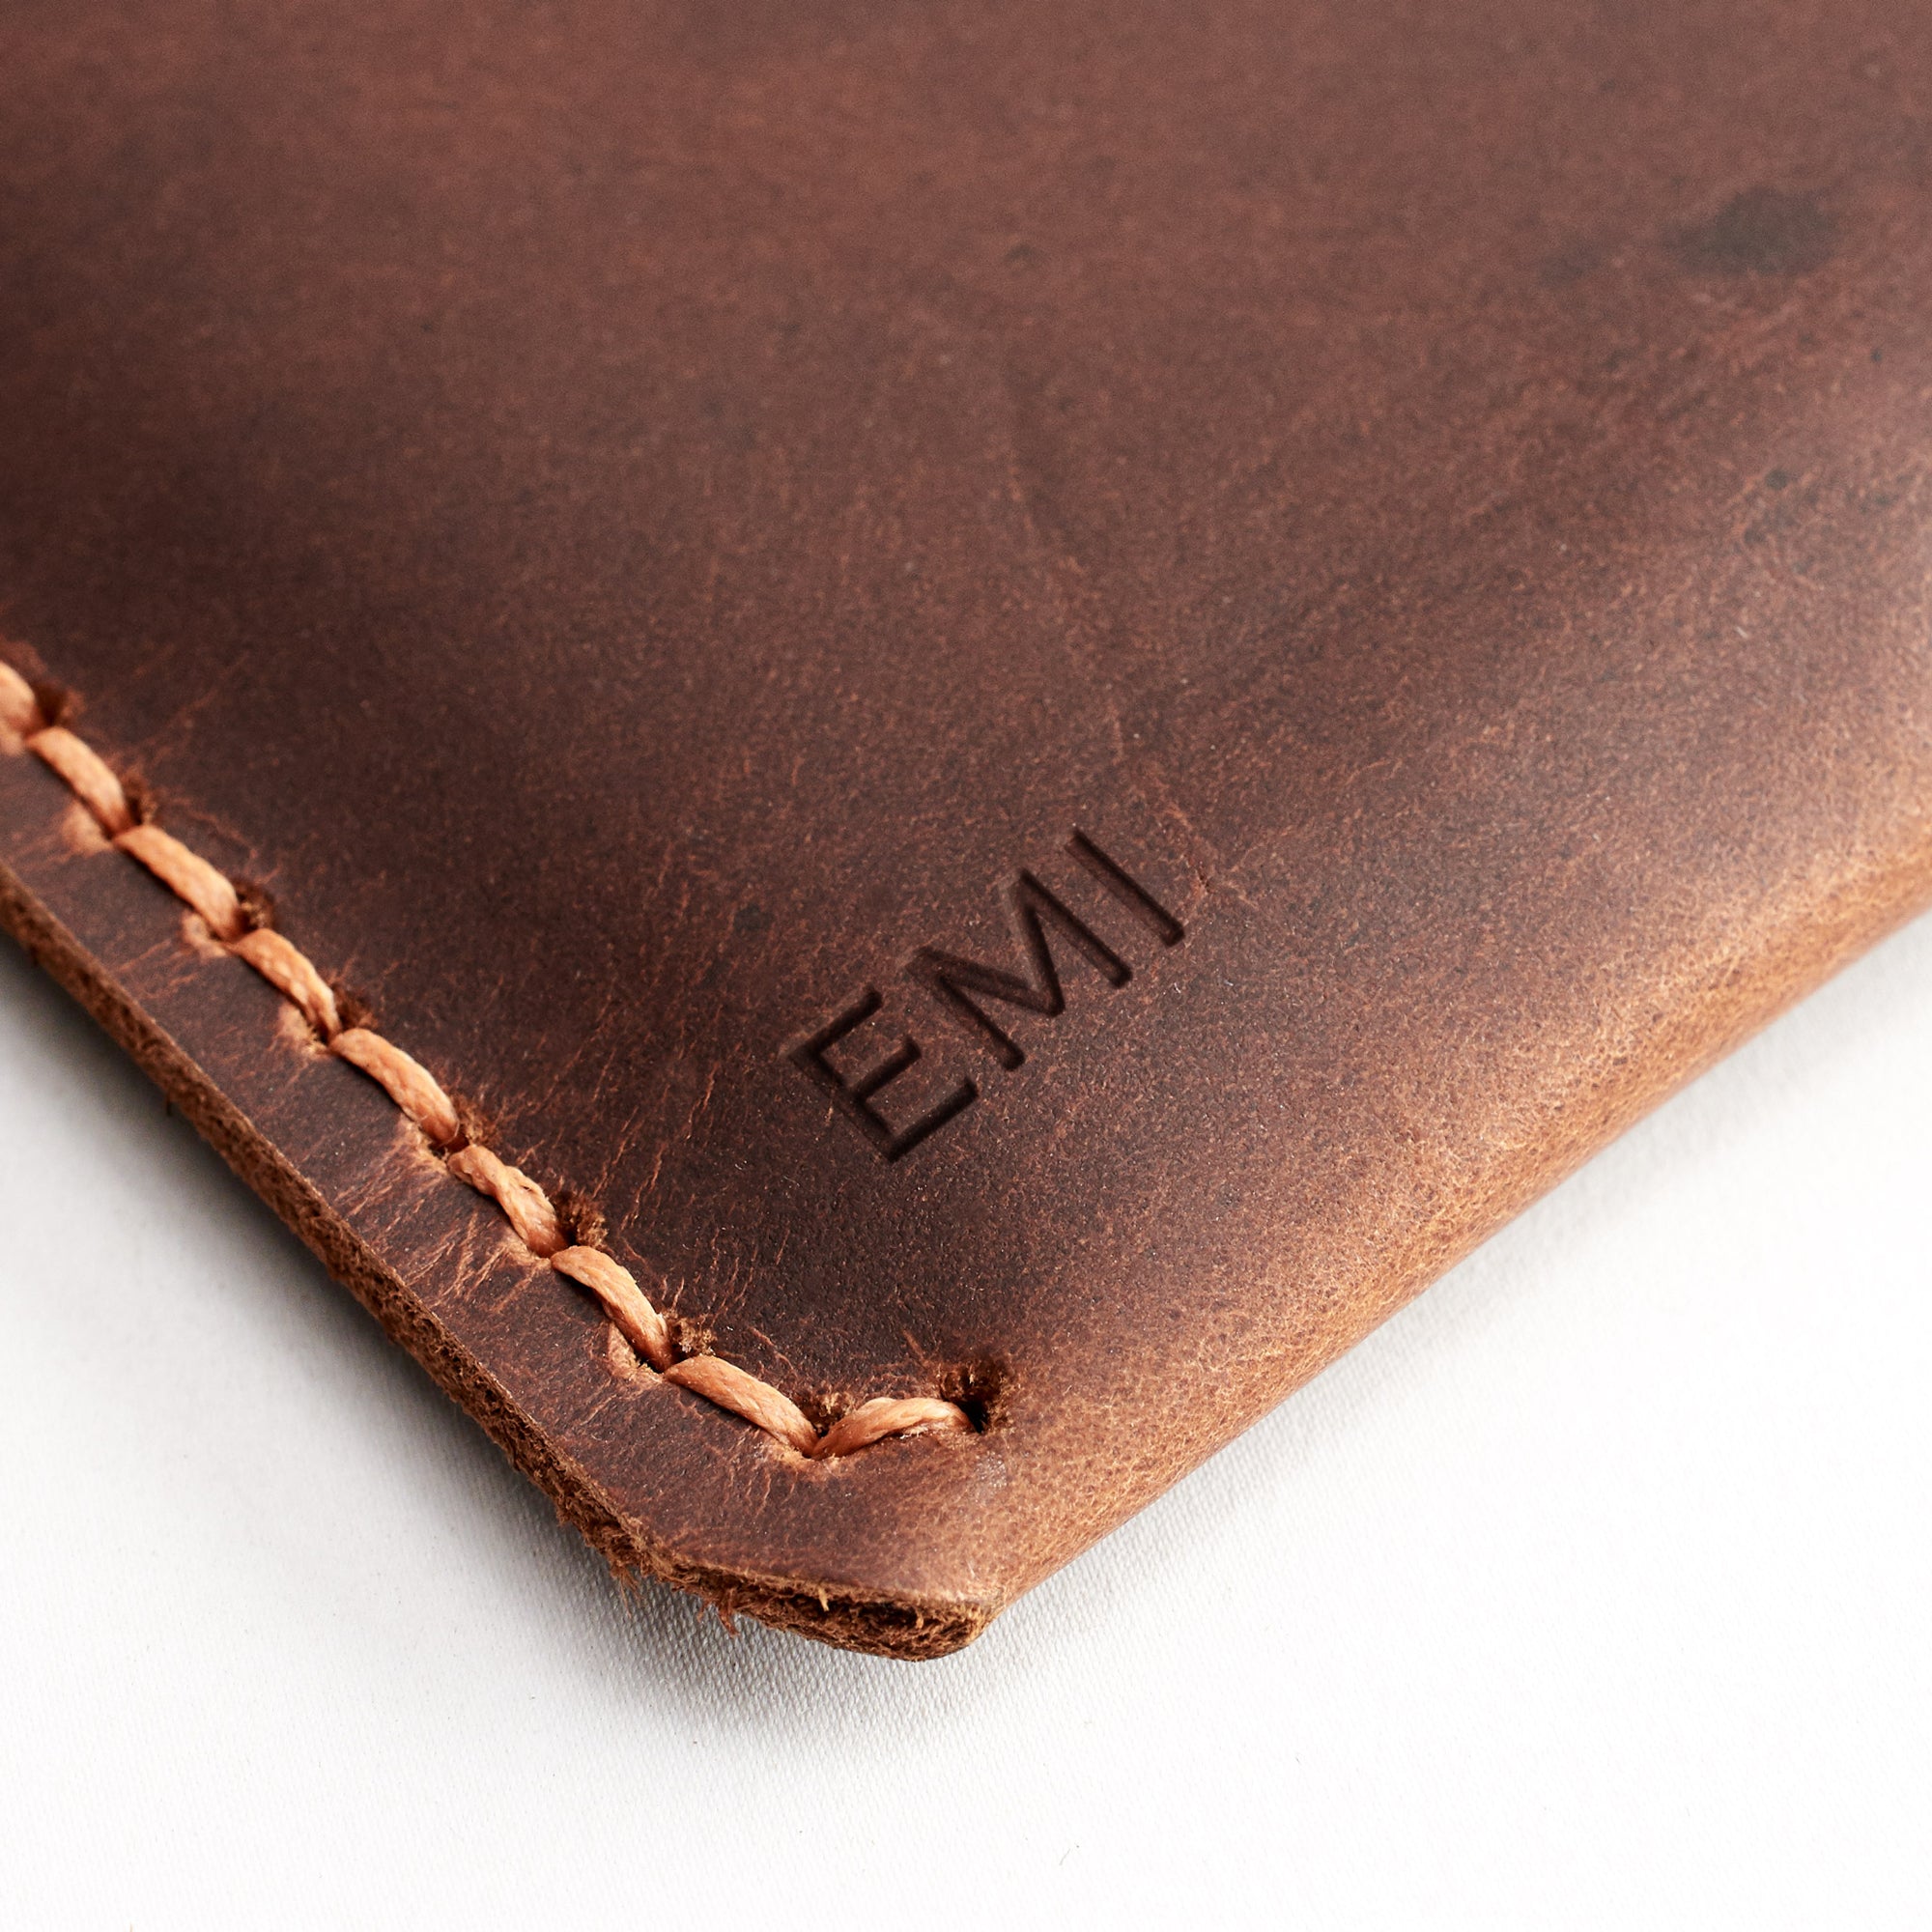 Custom monogram engraving. Tan leather sleeve for ASUS Zenbook Pro Duo. Mens gifts